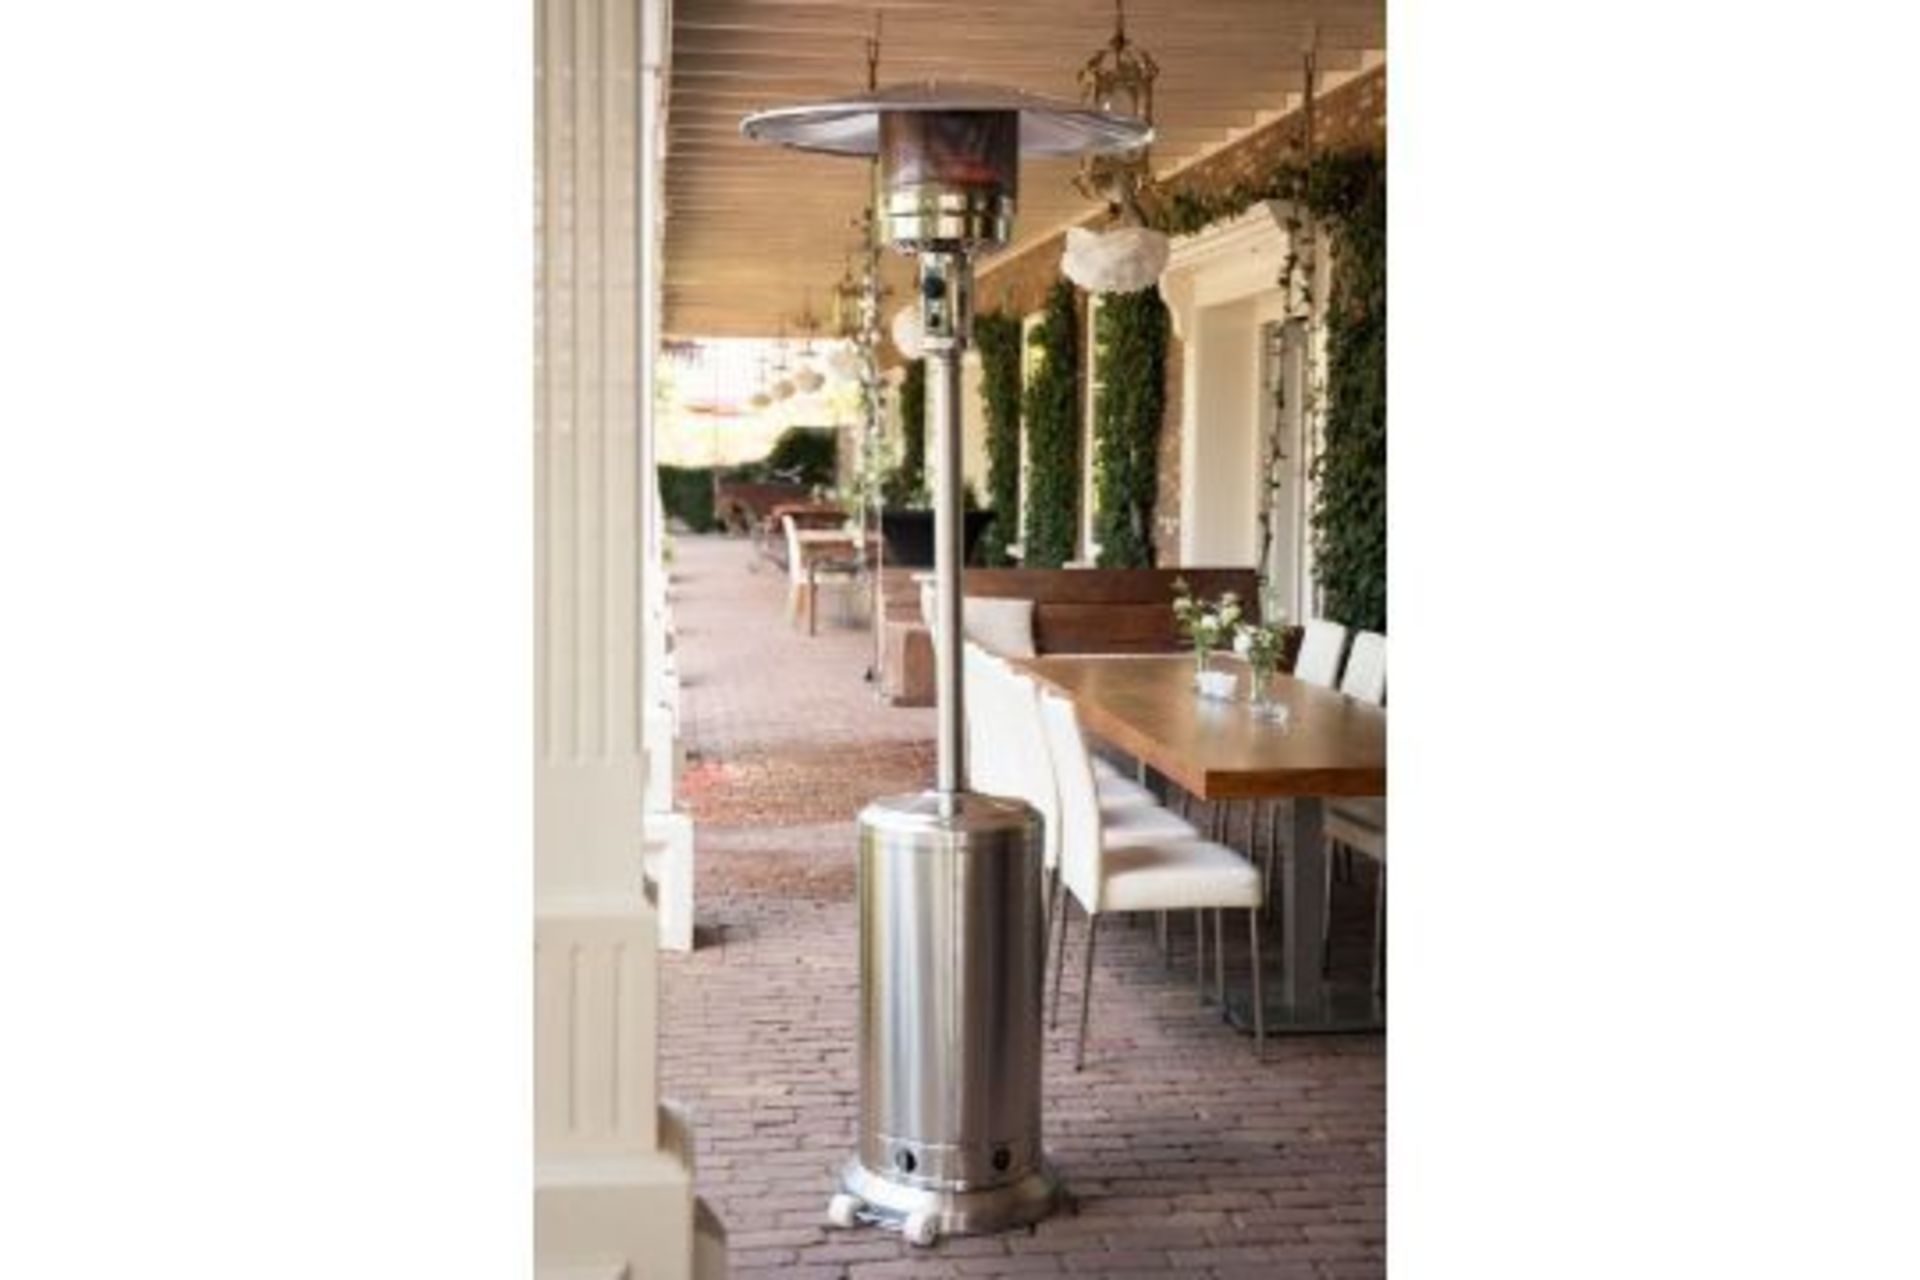 Brand new The Sunred Sargas GH12B is a stylish patio heater RRP £329. With a height of 205 cm it - Image 4 of 4